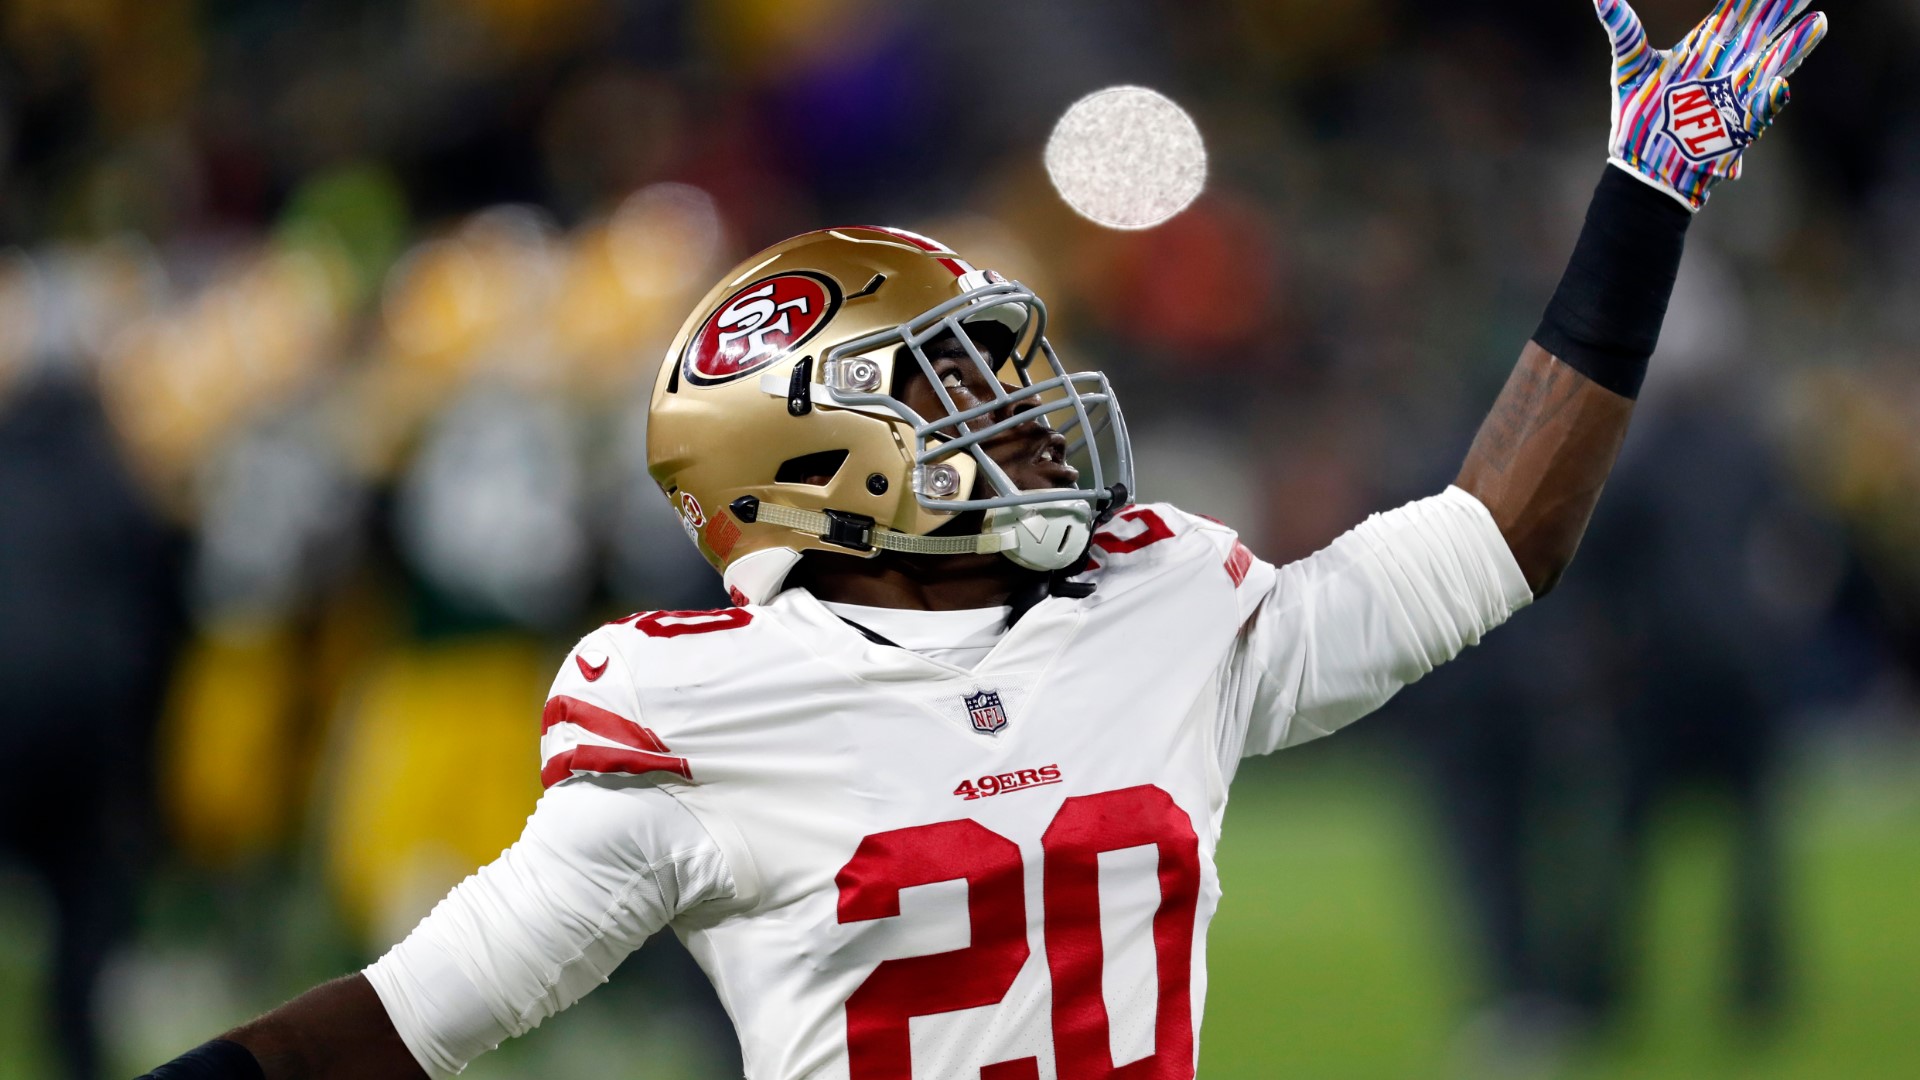 The San Francisco 49ers have re-signed defensive back Jimmie Ward to a one-year deal.